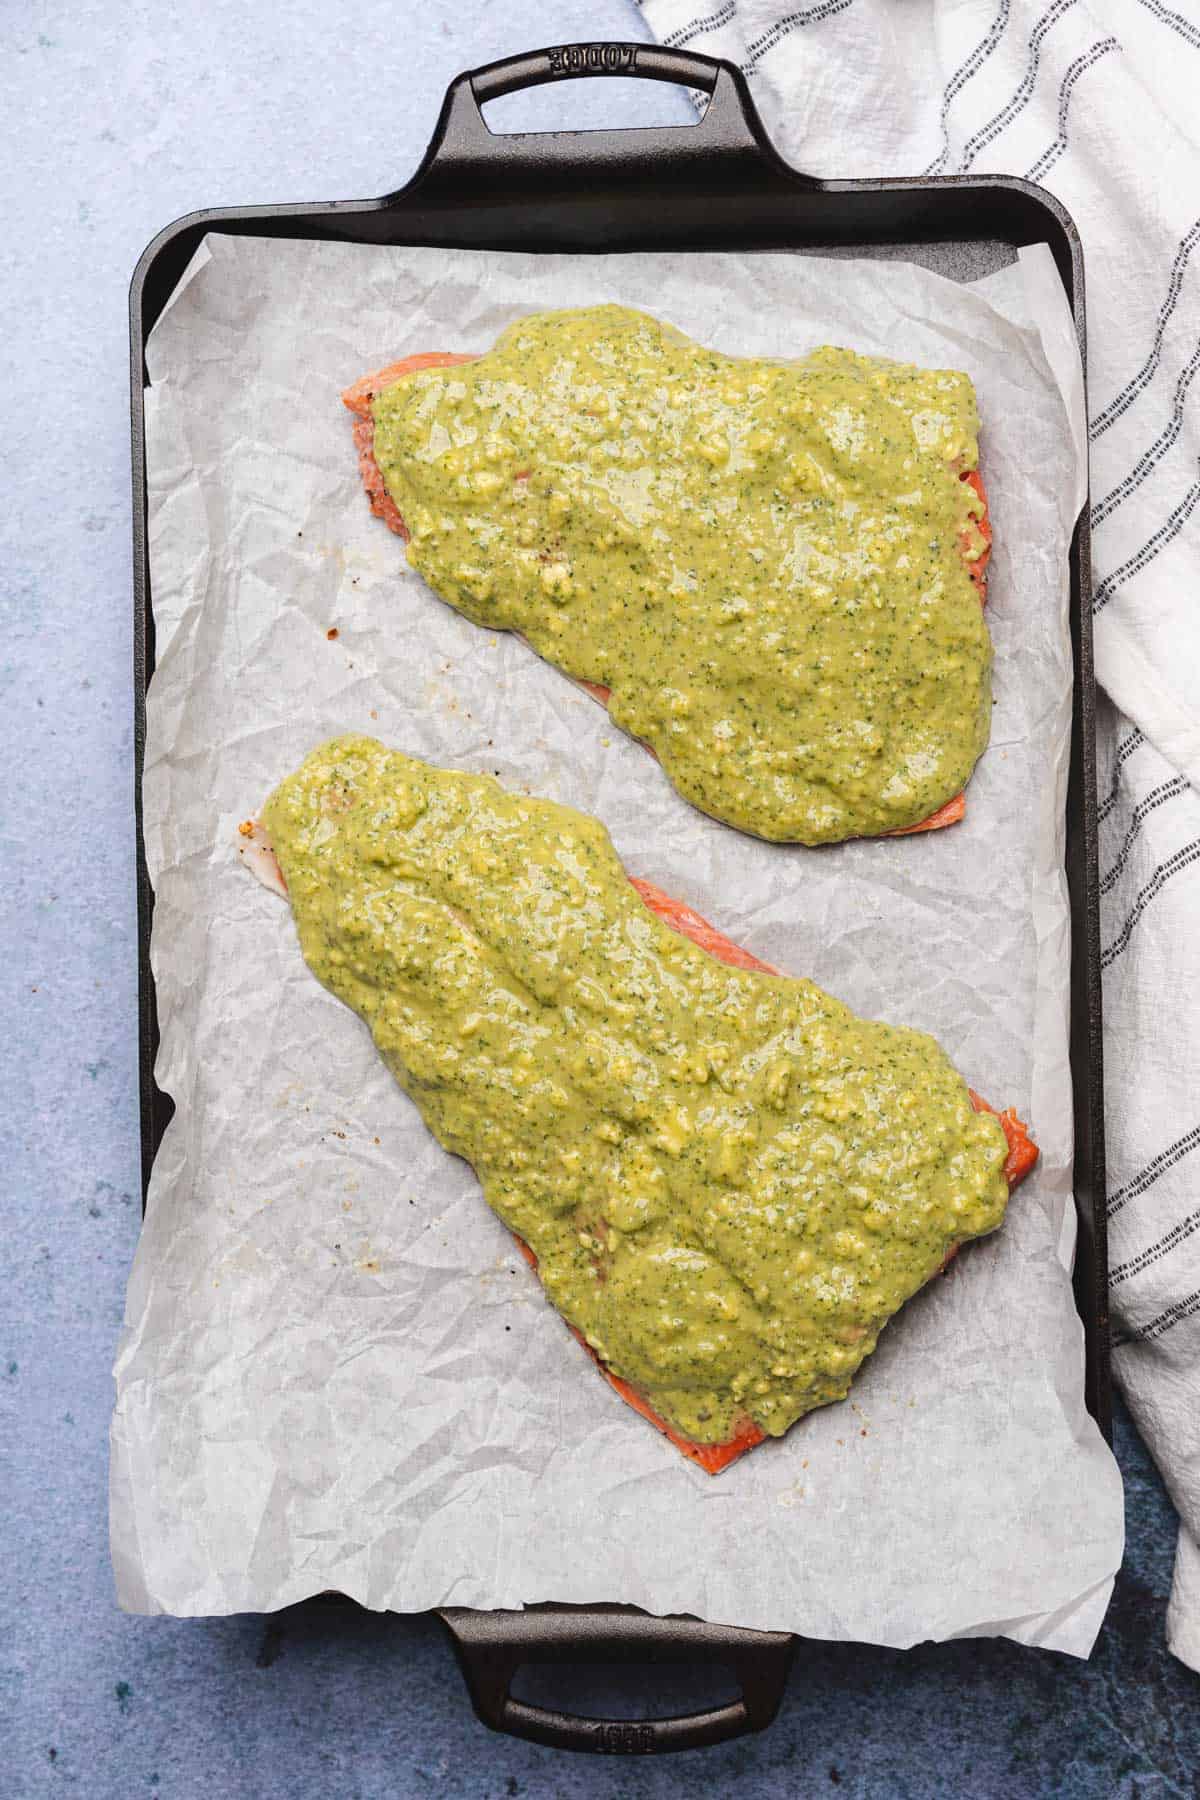 raw salmon fillets covered in pesto butter mixture on a prepared baking sheet